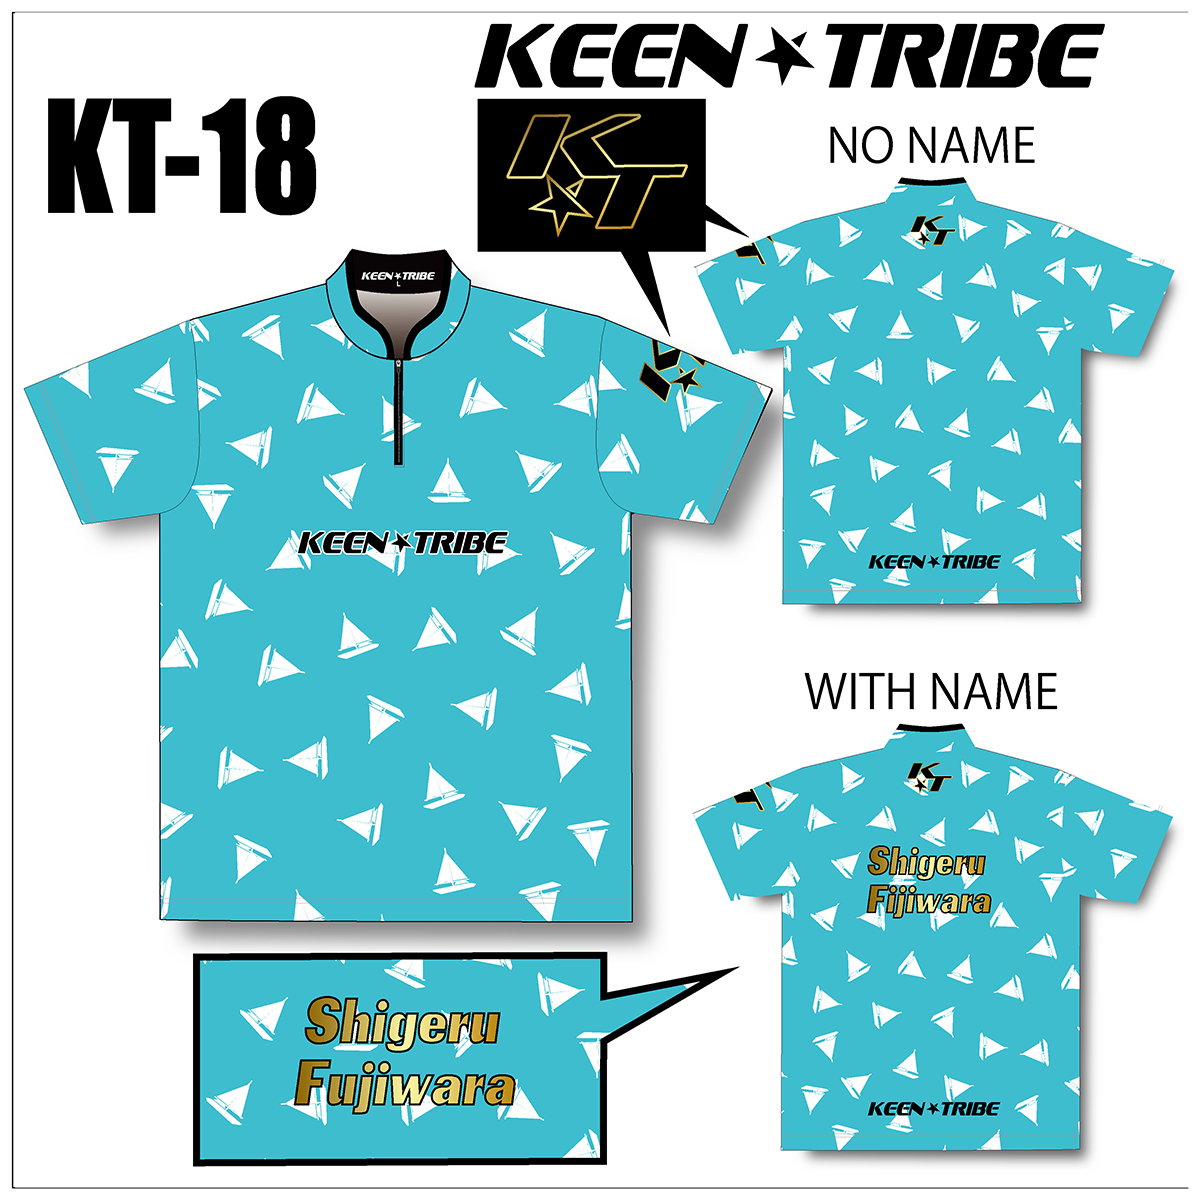 KEEN ★ TRIBE　KT-18(受注生産)